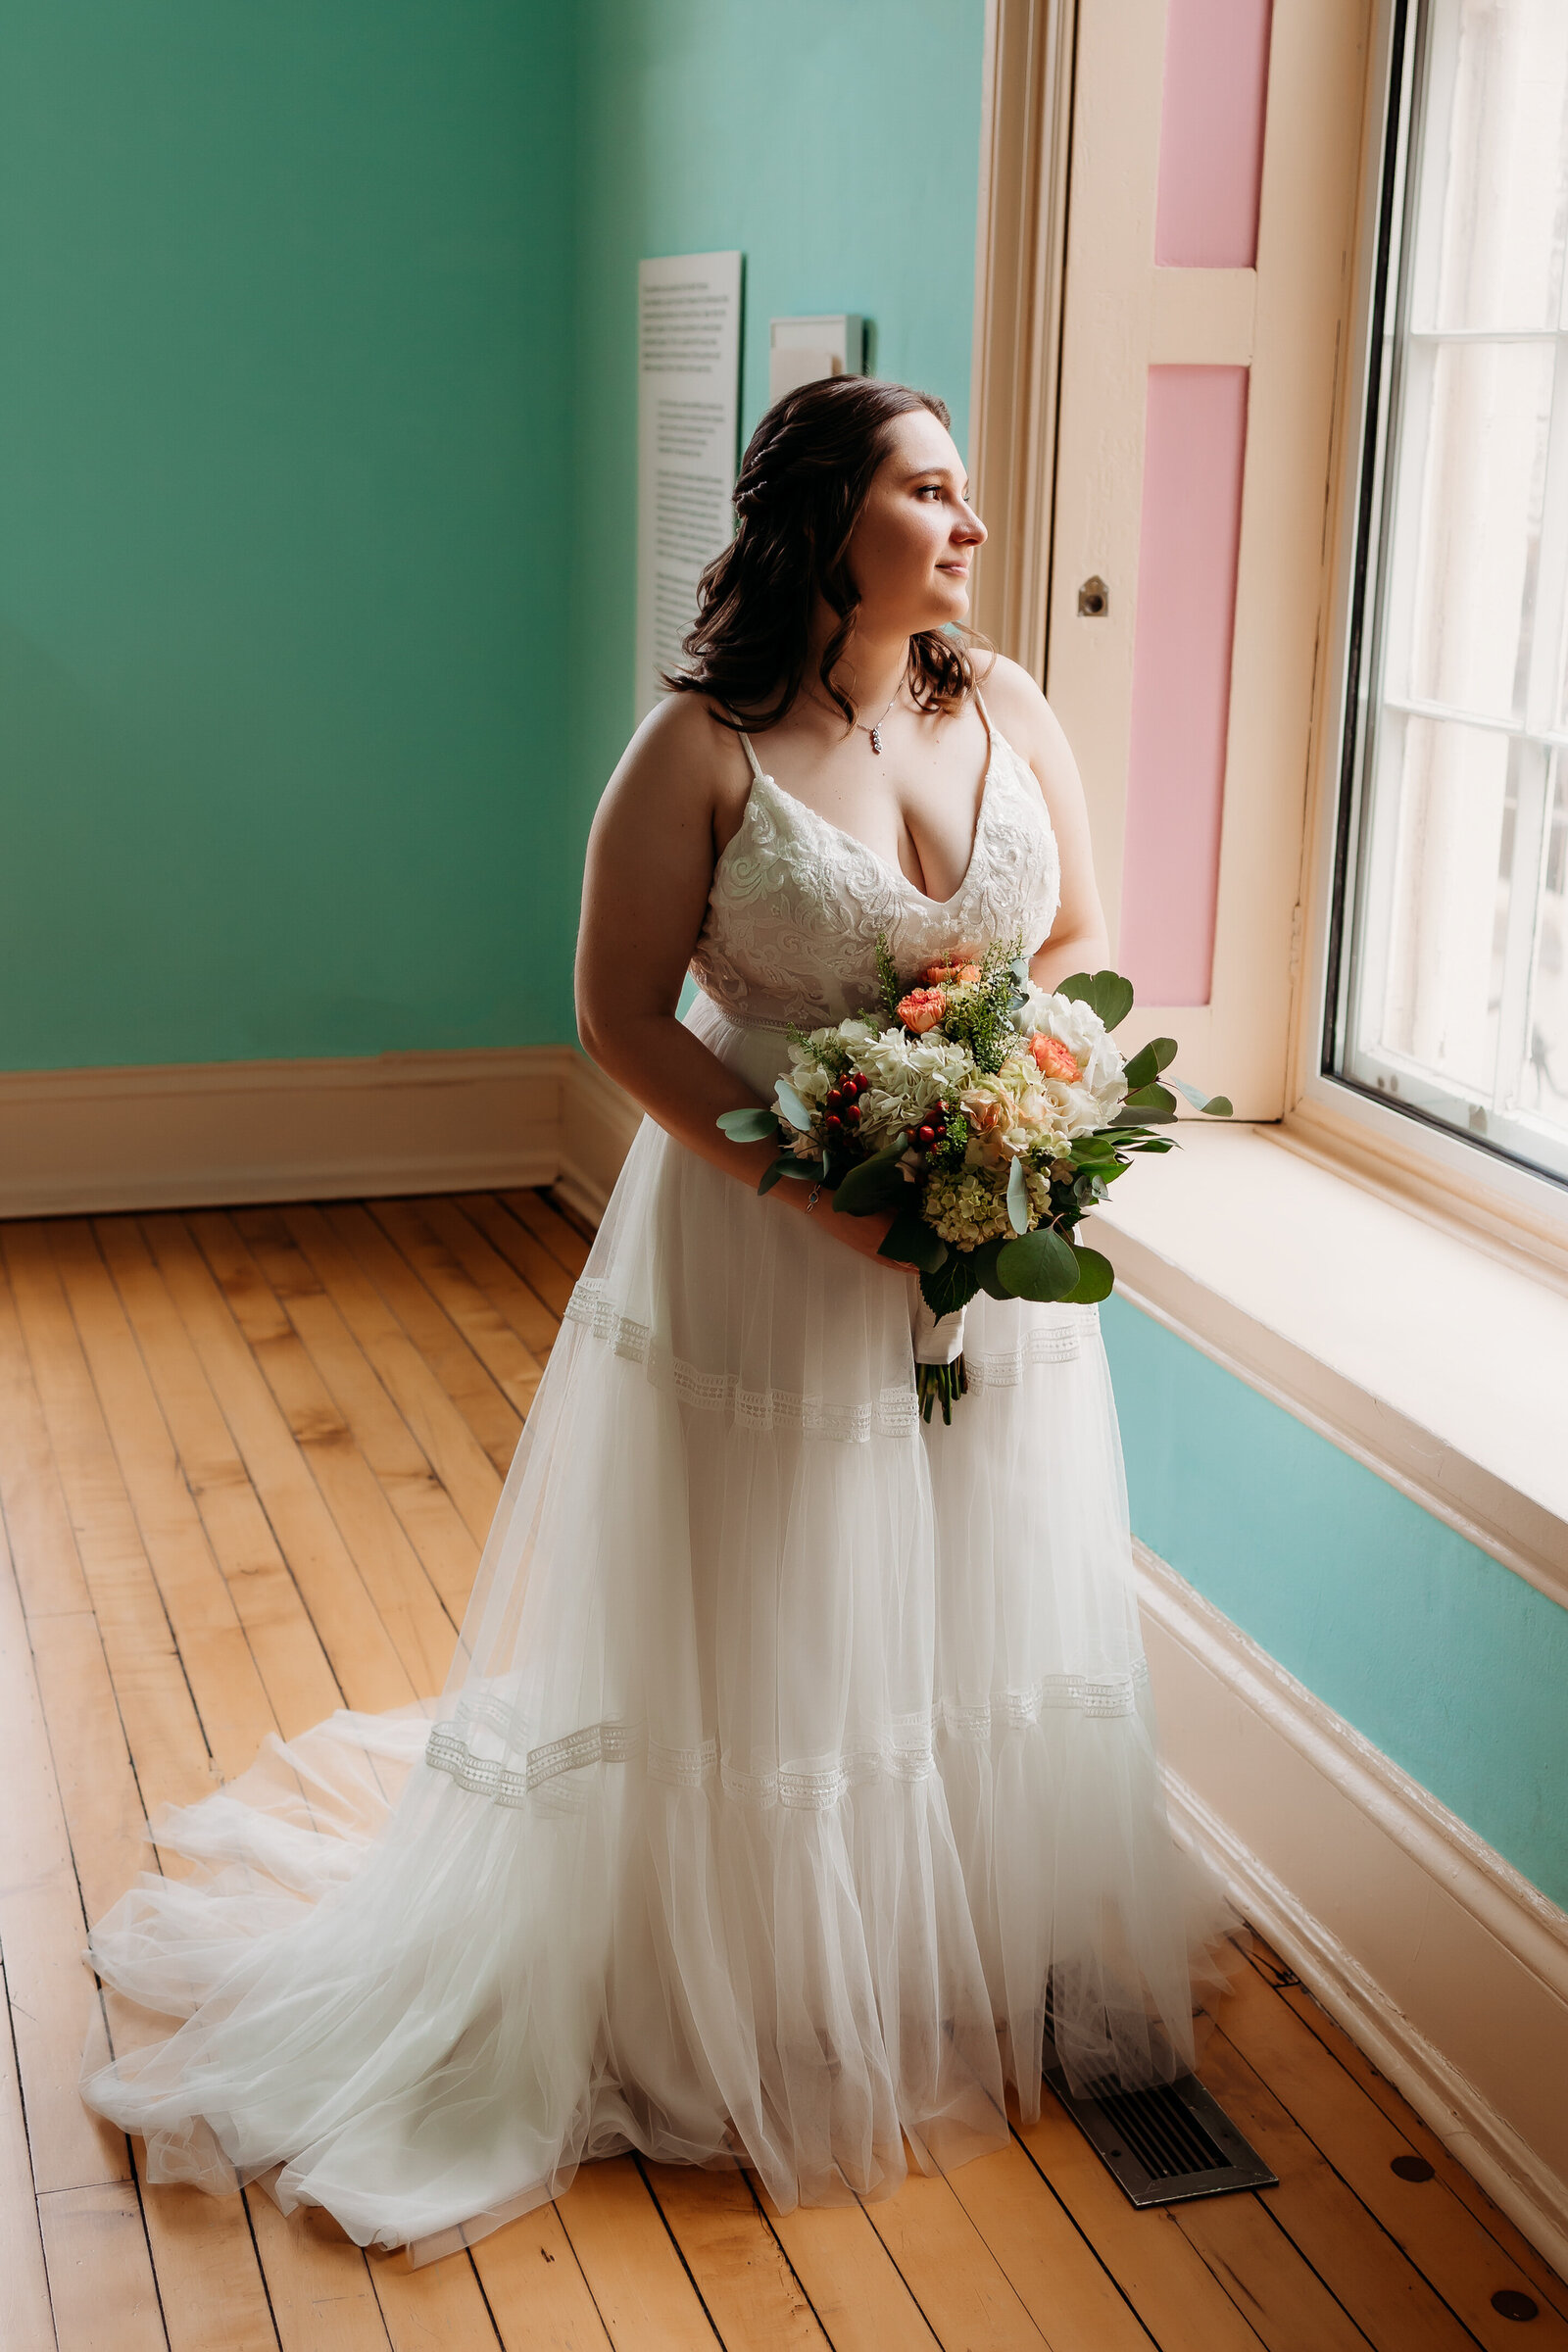 Bride stands with her bouquet gazing out the window for a photo